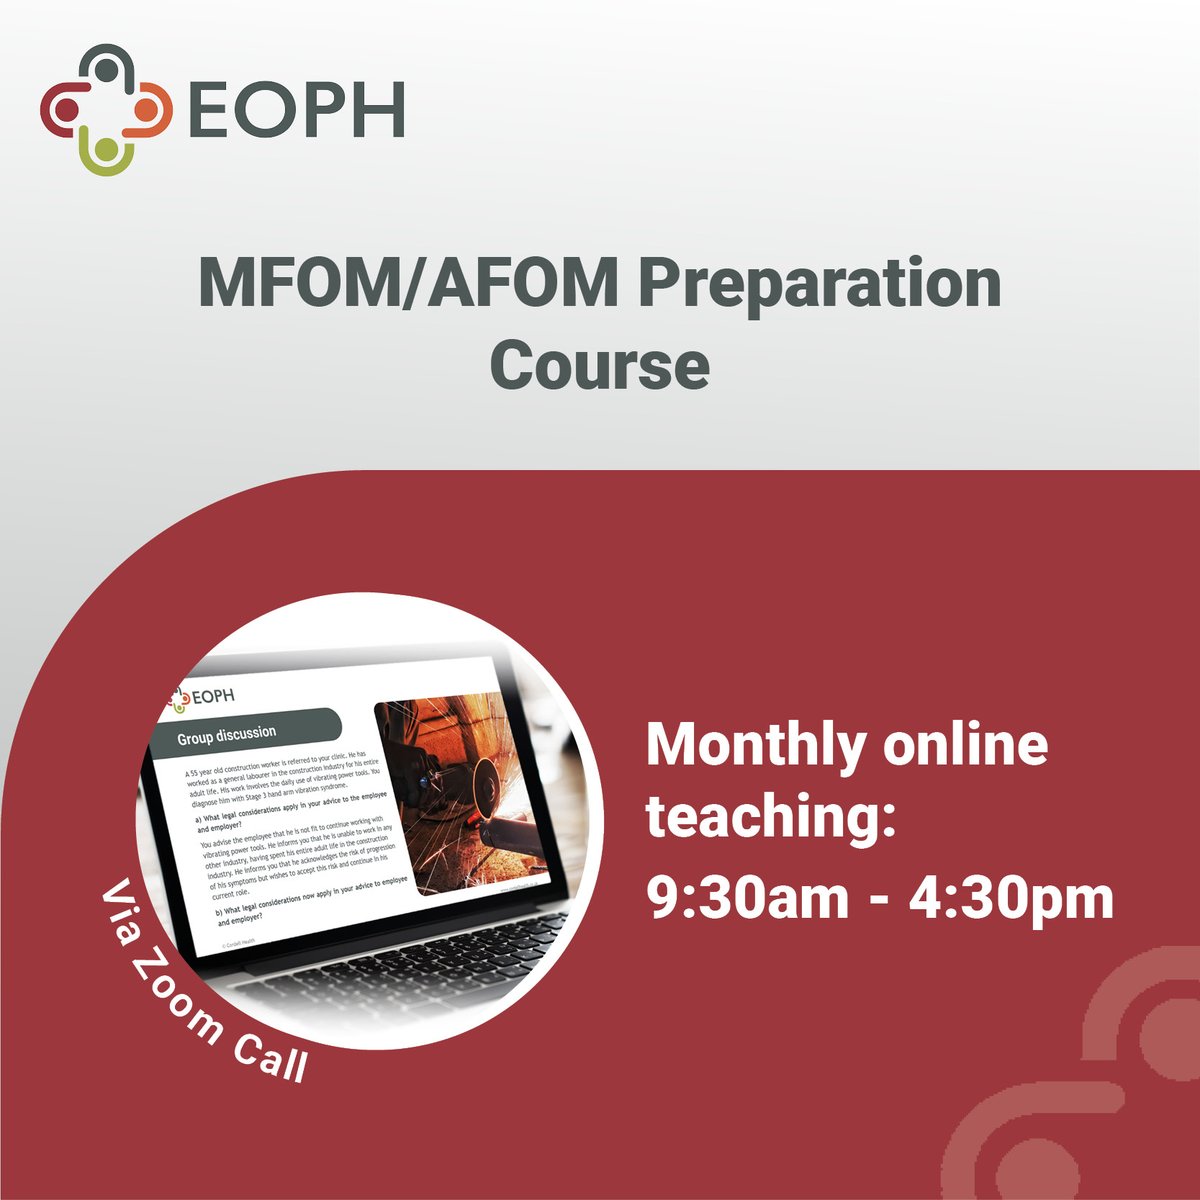 Our Preparation Course is designed for doctors who are preparing to sit Part 2 of the Membership/Associateship of the Faculty of Occupational Medicine exam. 

Why not join our cohort 3 to help prepare you? Visit: bitly.ws/xnIF #occupationalmedicine #workplacehealth #cpd